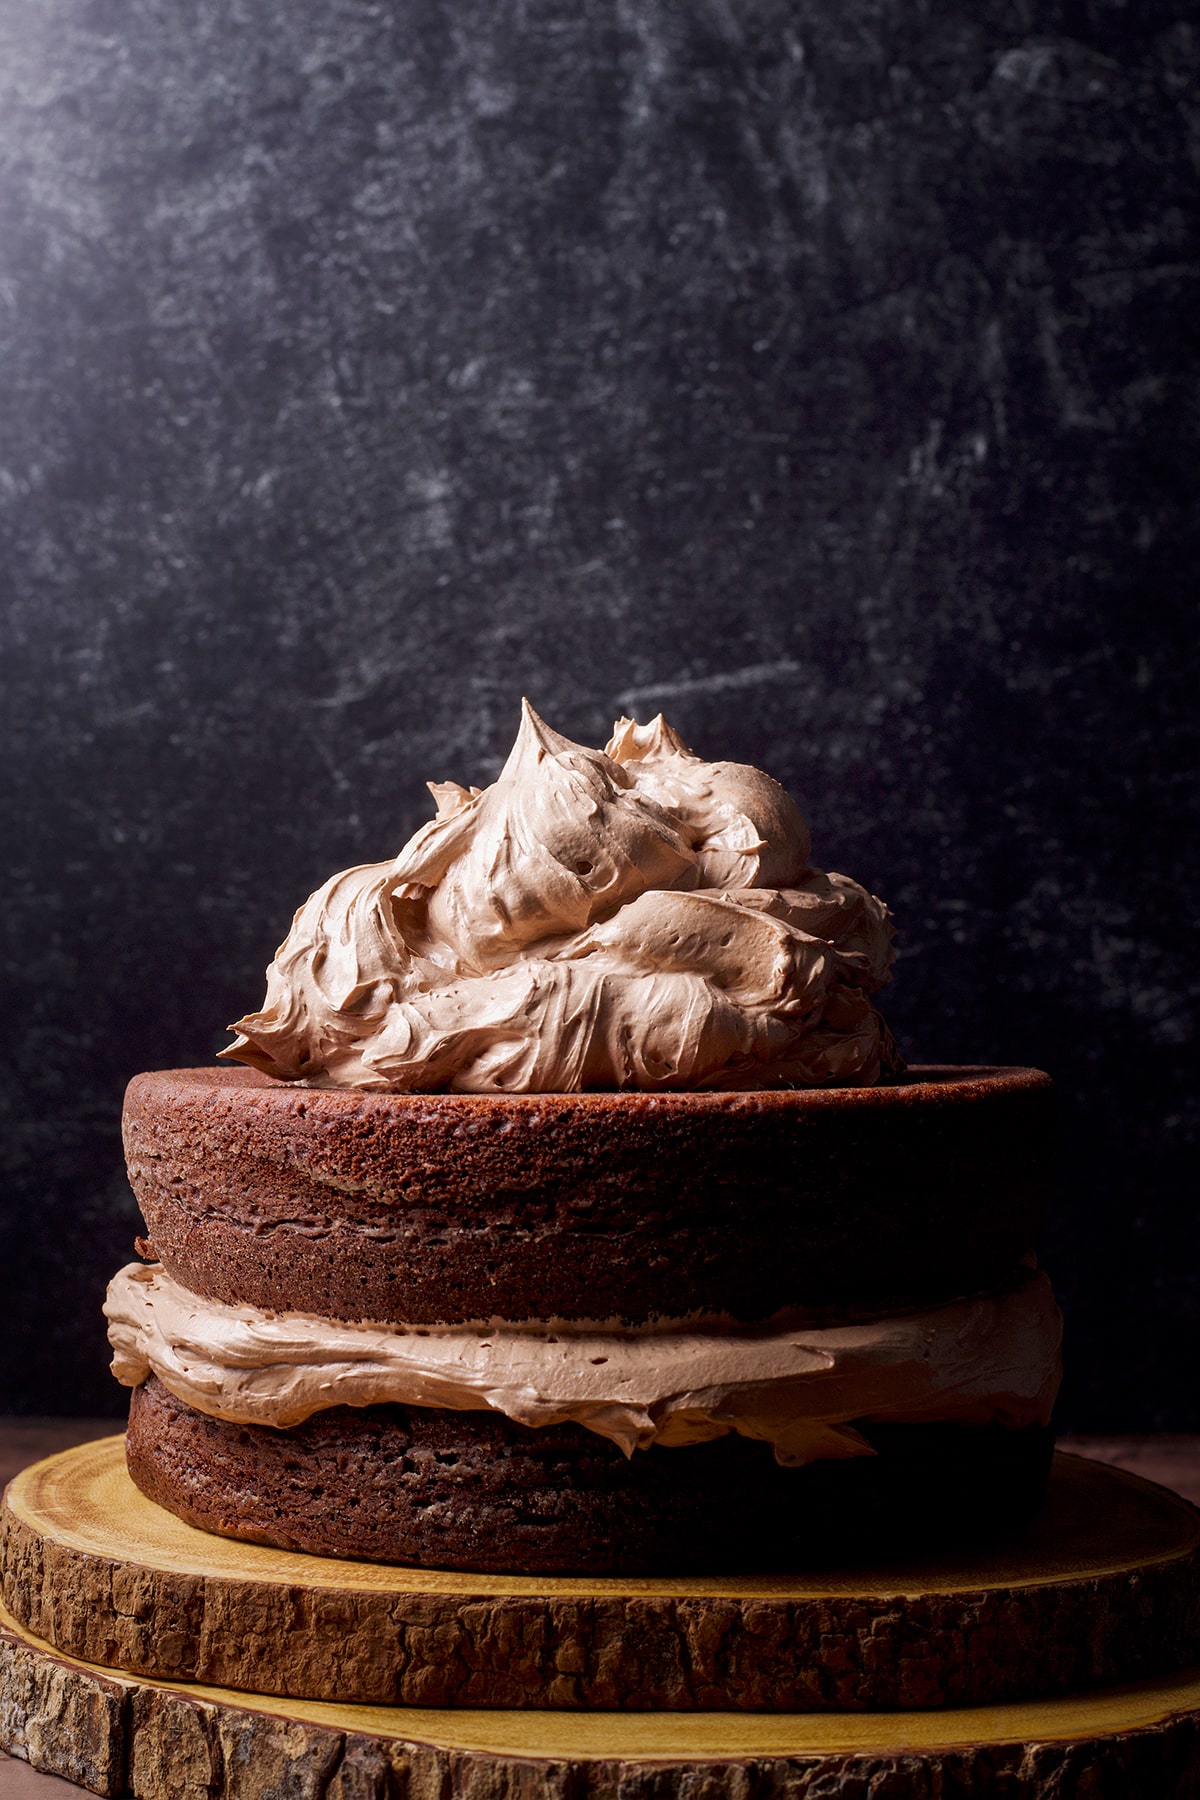 Two layers of chocolate cake that have been filled and topped with milk chocolate buttercream.